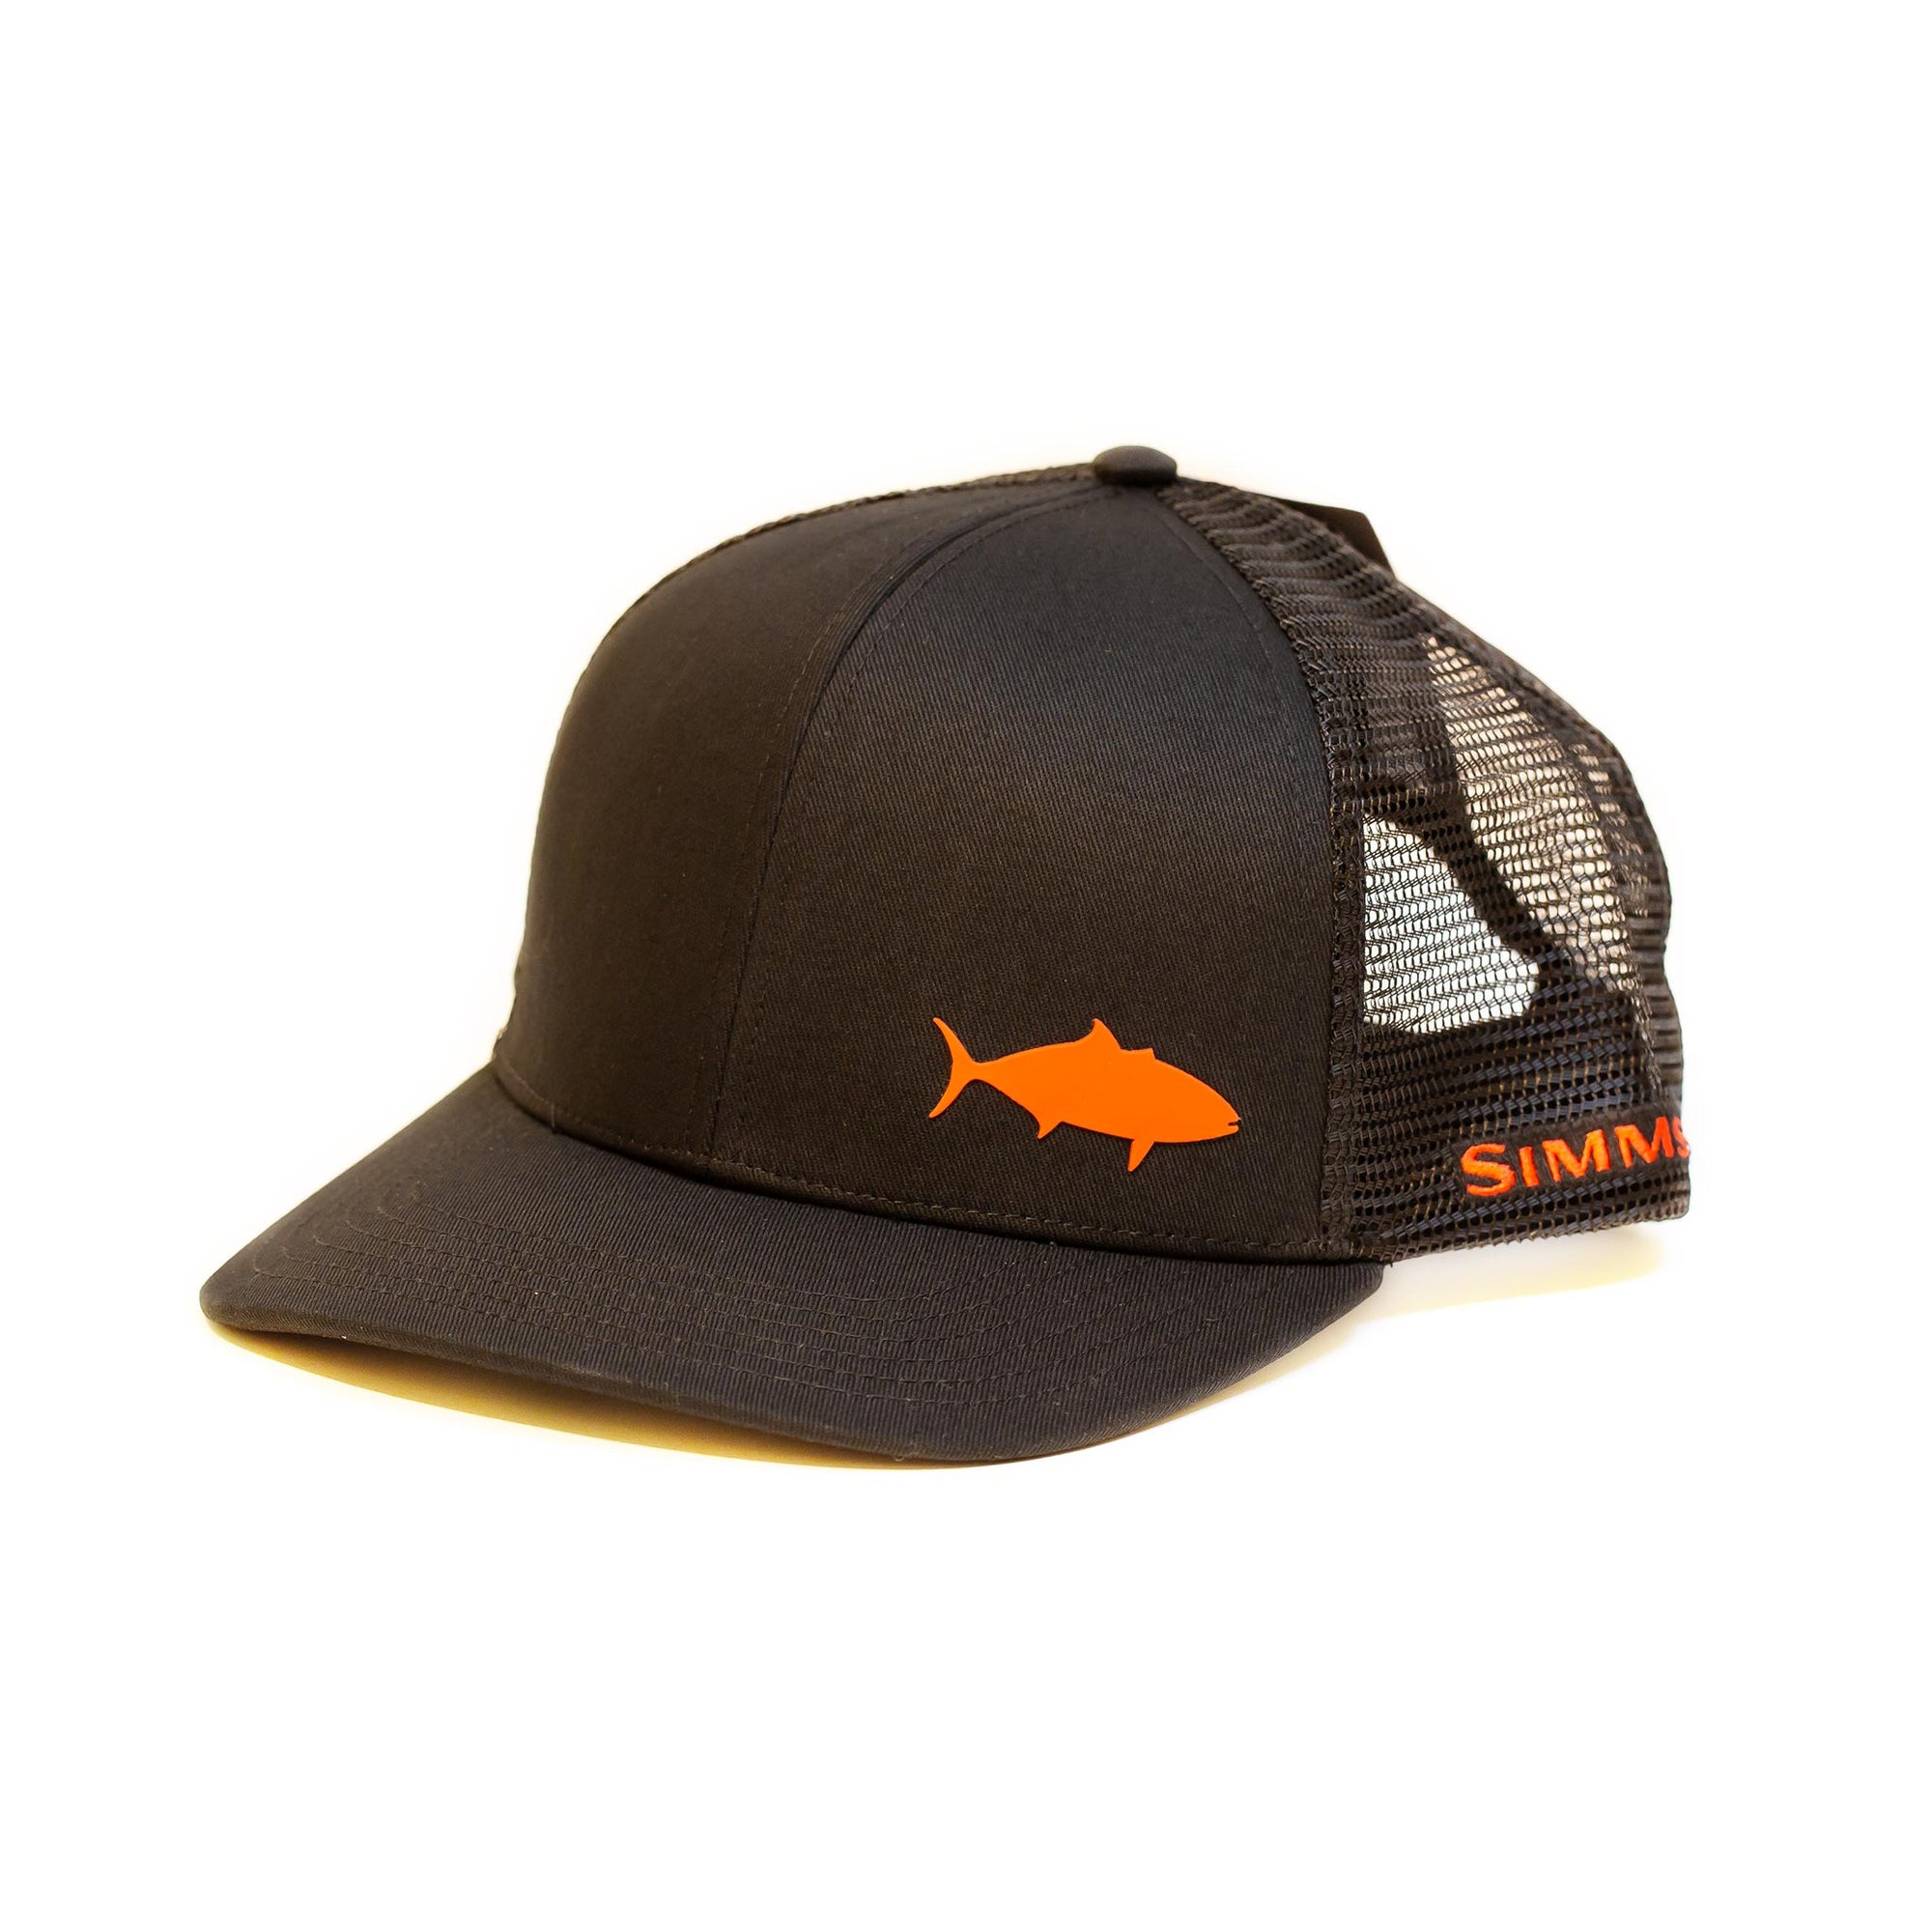 Simms Payoff Trucker Kingfish Cap - Compleat Angler Nedlands